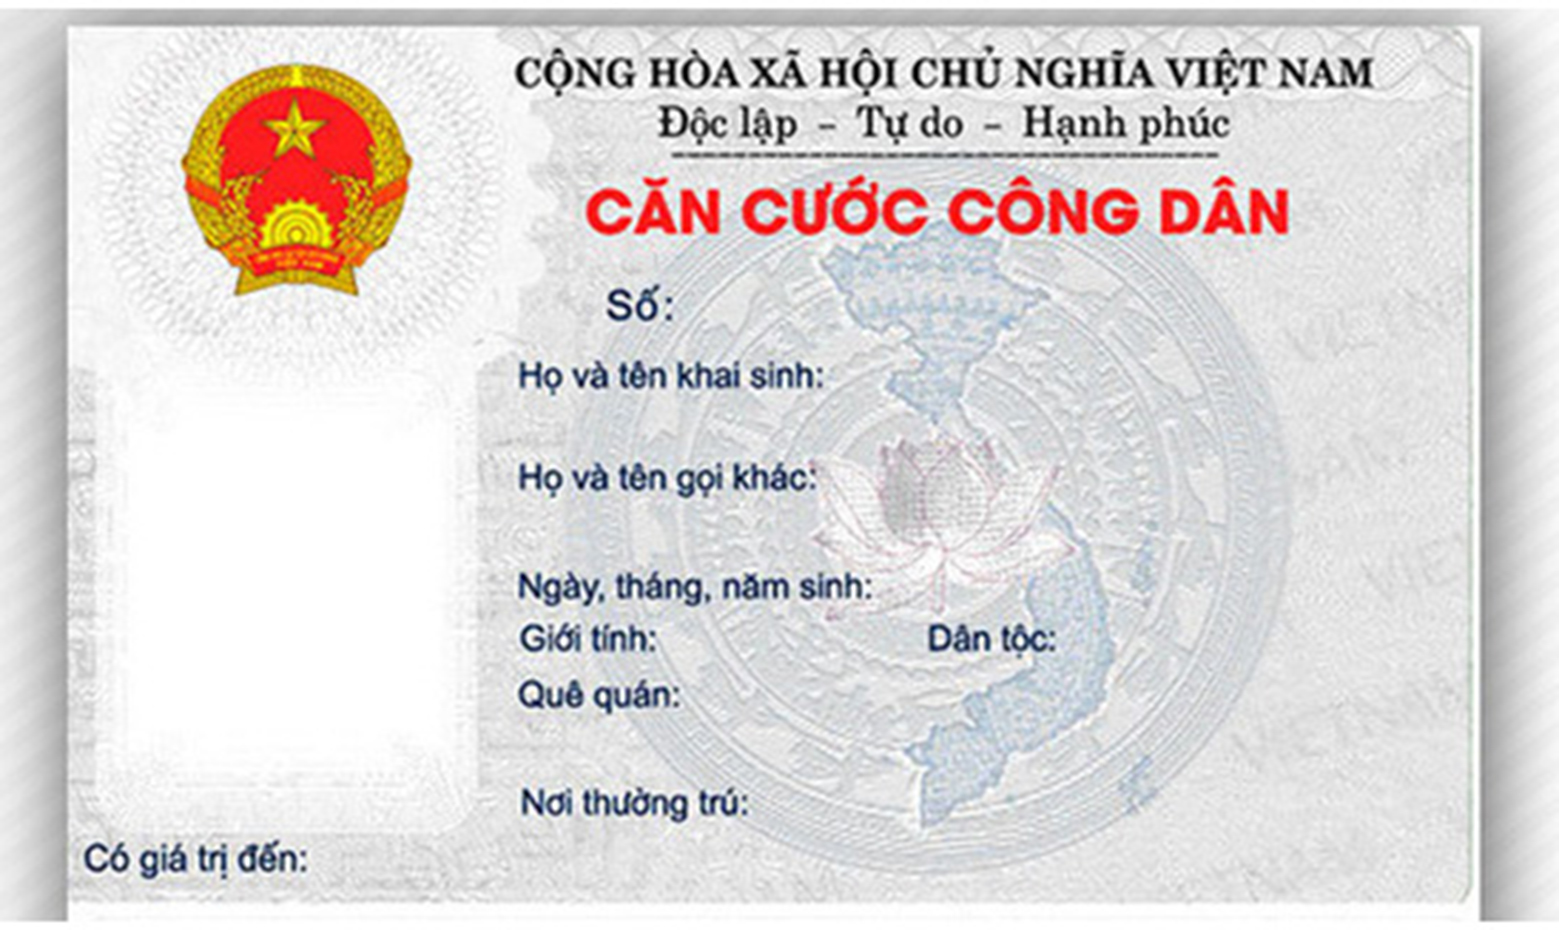 quy-dinh-ve-the-can-cuoc-cong-dan-y-nghia-12-so-tren-the-cccd